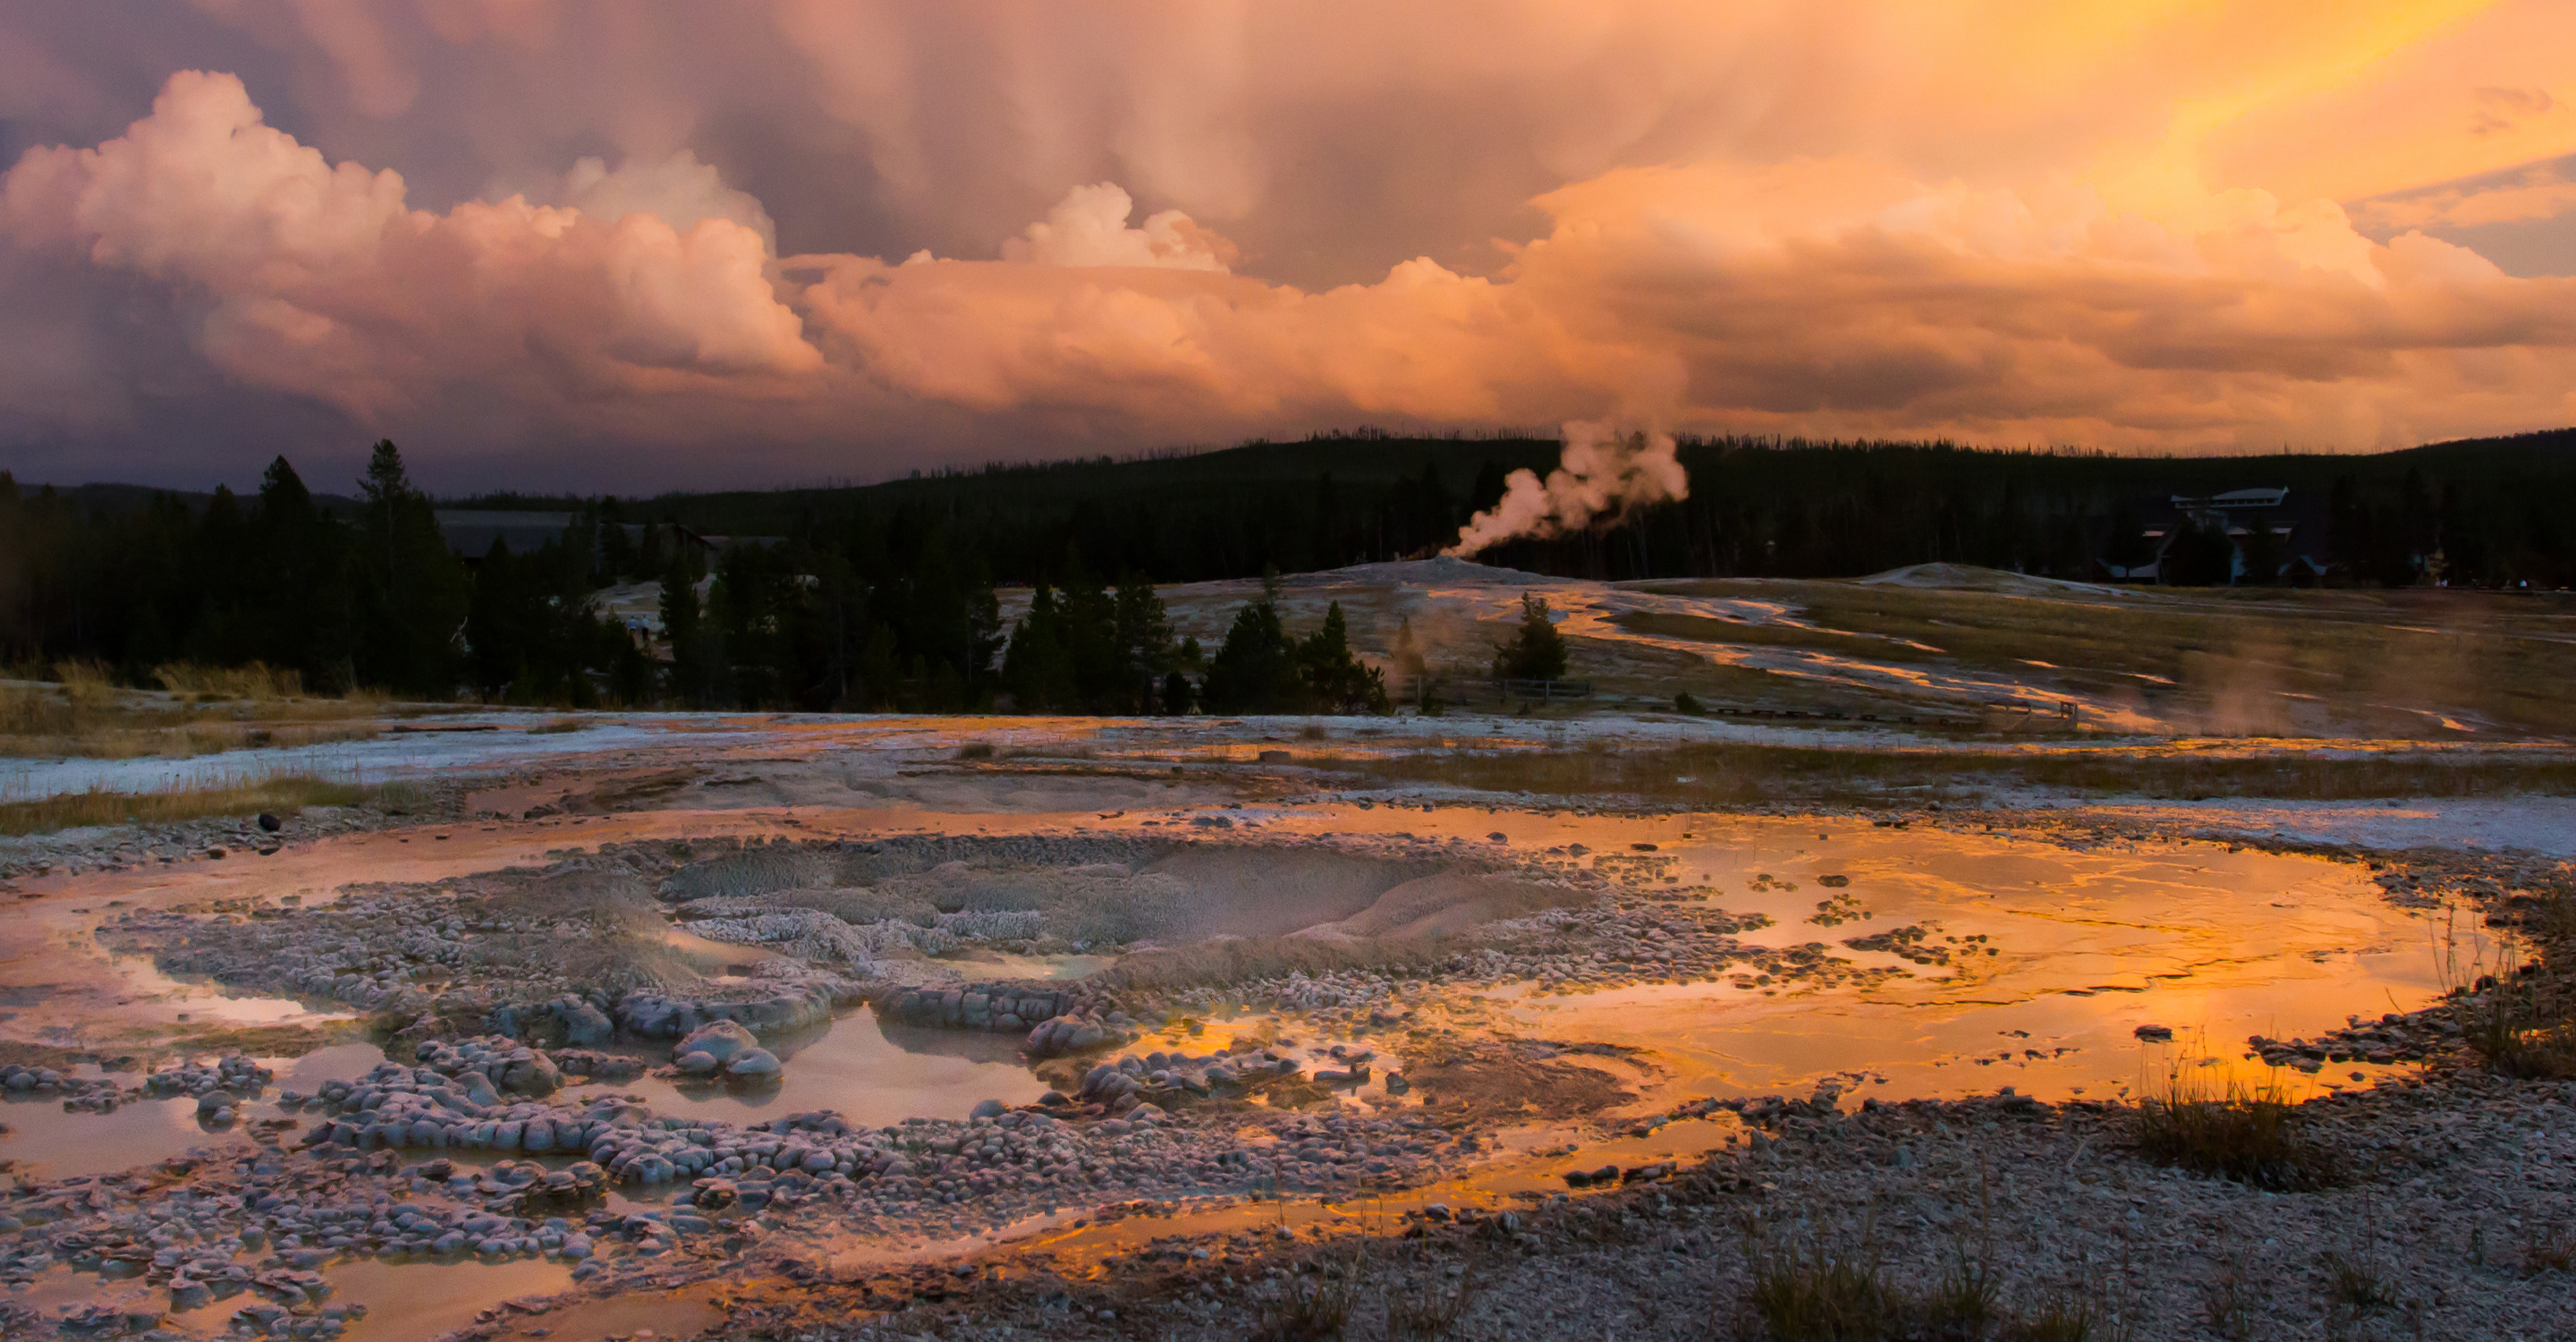 Geysers at sunset in Yellowstone National Park, United States